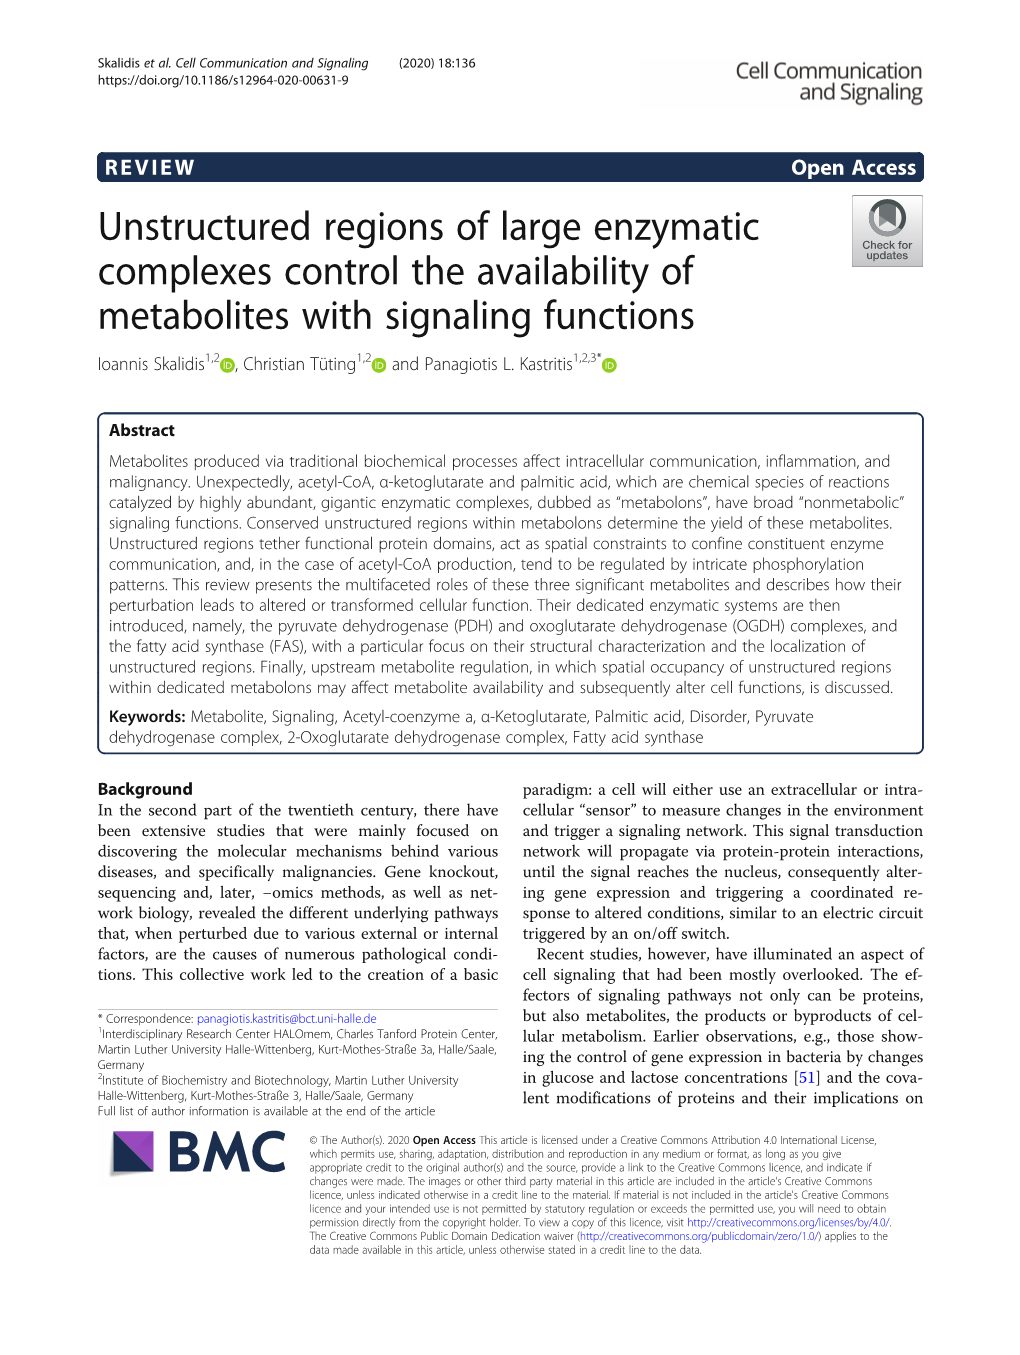 Unstructured Regions of Large Enzymatic Complexes Control The